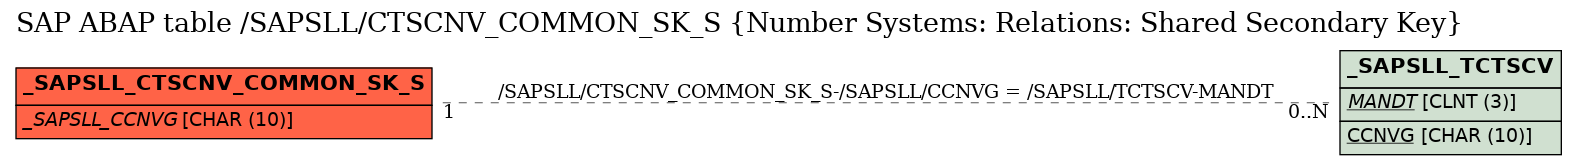 E-R Diagram for table /SAPSLL/CTSCNV_COMMON_SK_S (Number Systems: Relations: Shared Secondary Key)